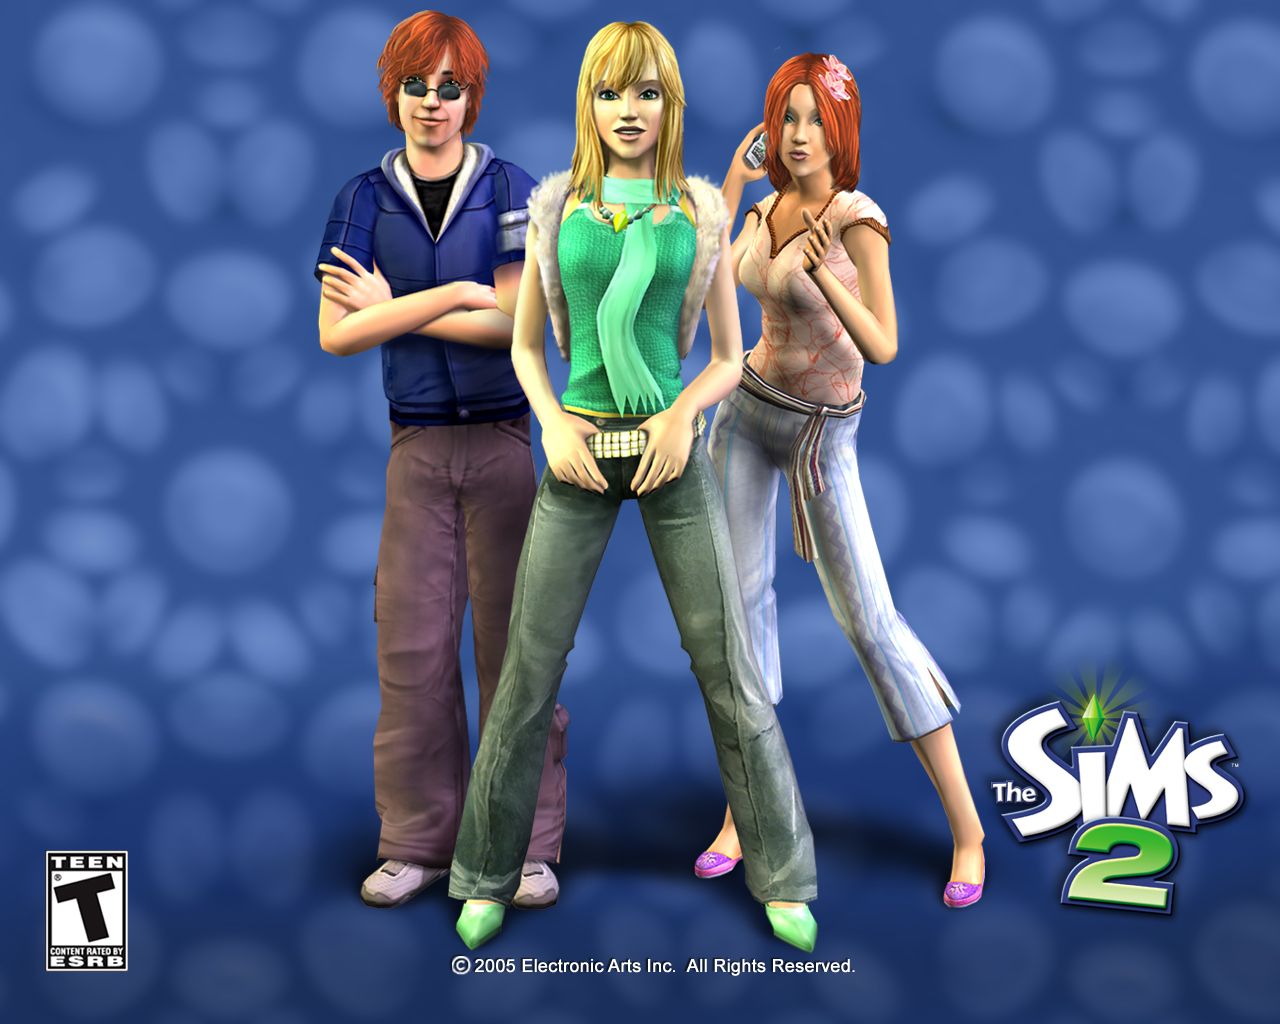 The Sims 2 Sims 2 Wallpaper